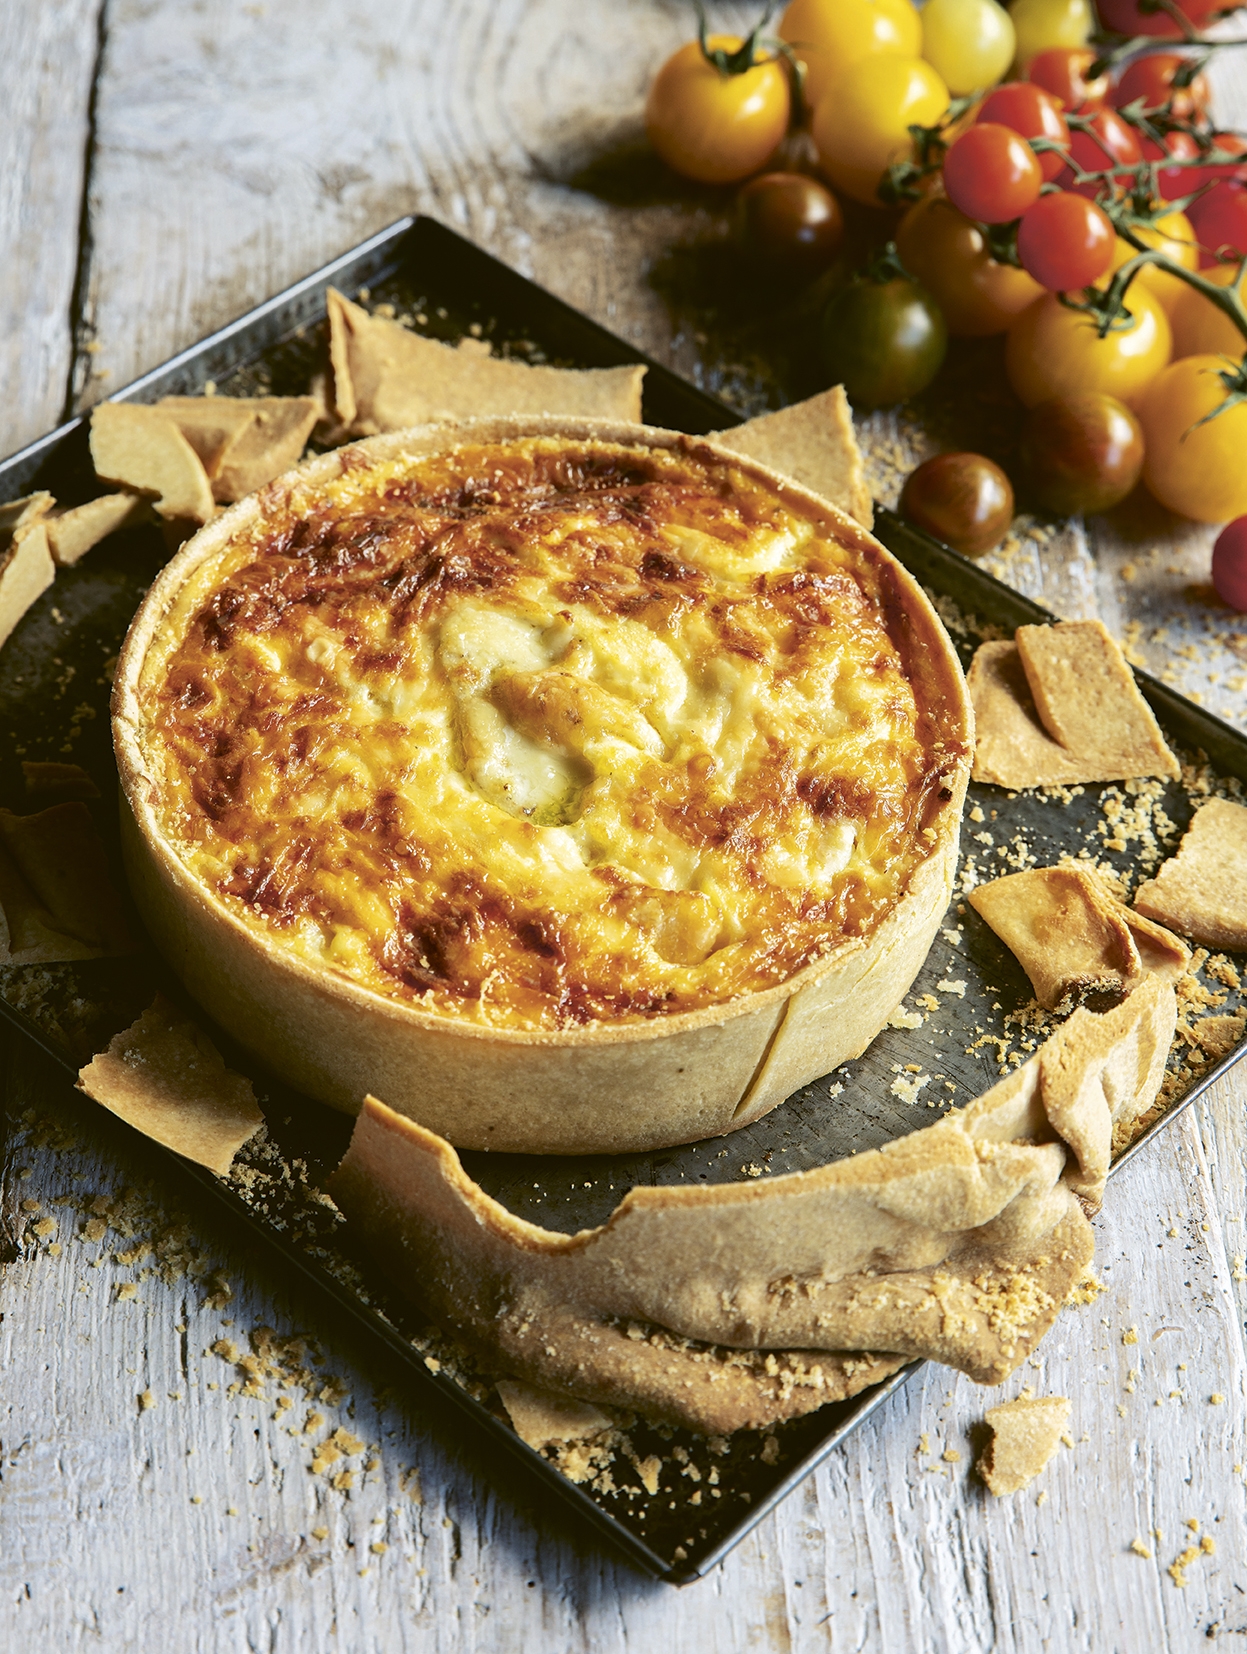 SMOKED HADDOCK AND JERSEY ROYAL QUICHE